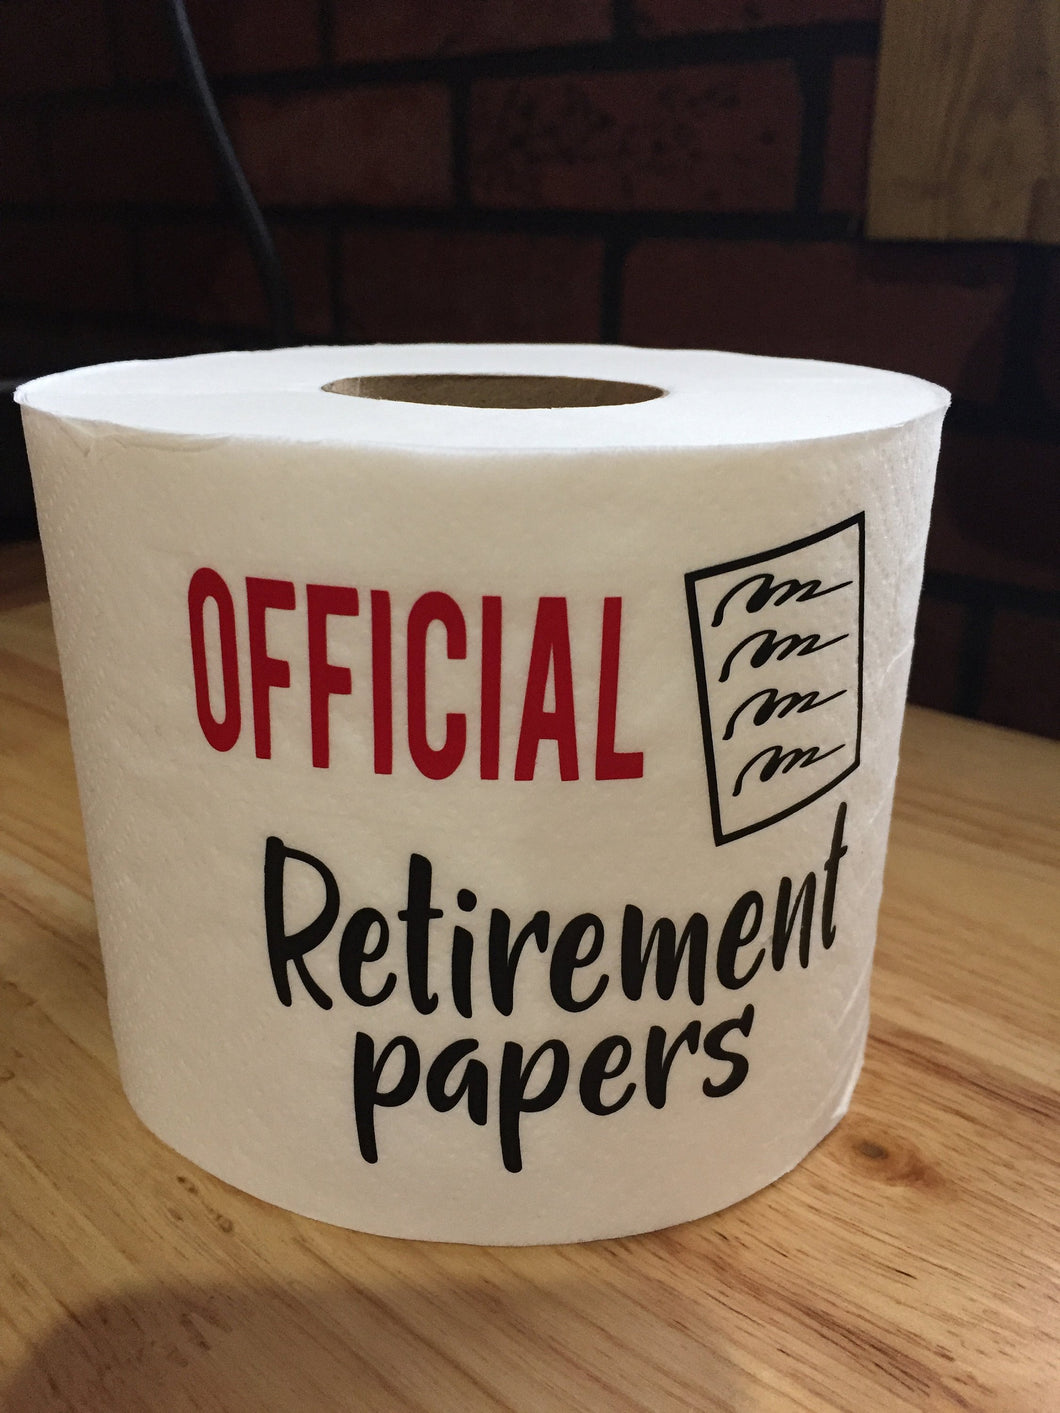 Funny Retirement Papers Gag Gift, Retirement Papers Funny Gag Gift, Gag Gift Funny Retirement Papers, Funny Retirement Gift Idea, Funny Gift